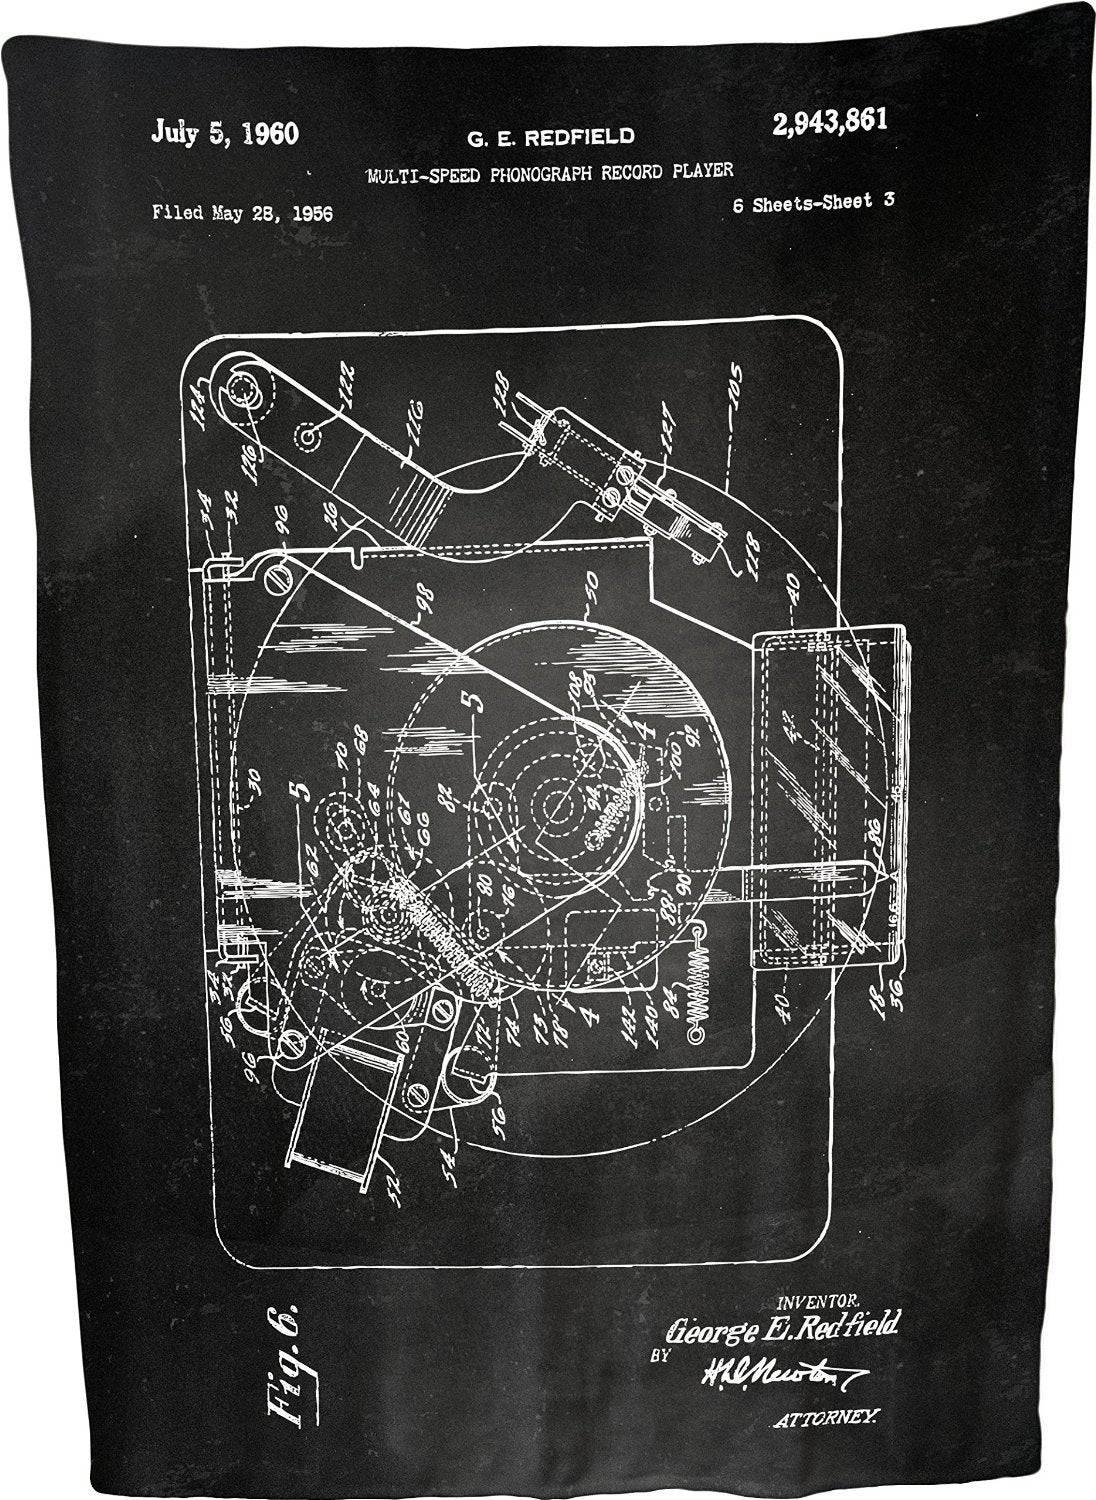 Multi-speed Phonograph Record Player Patent Illustration by George E Redfield Coral Plush Throw Blanket / Tapestry Wall Hanging 60" x 80"